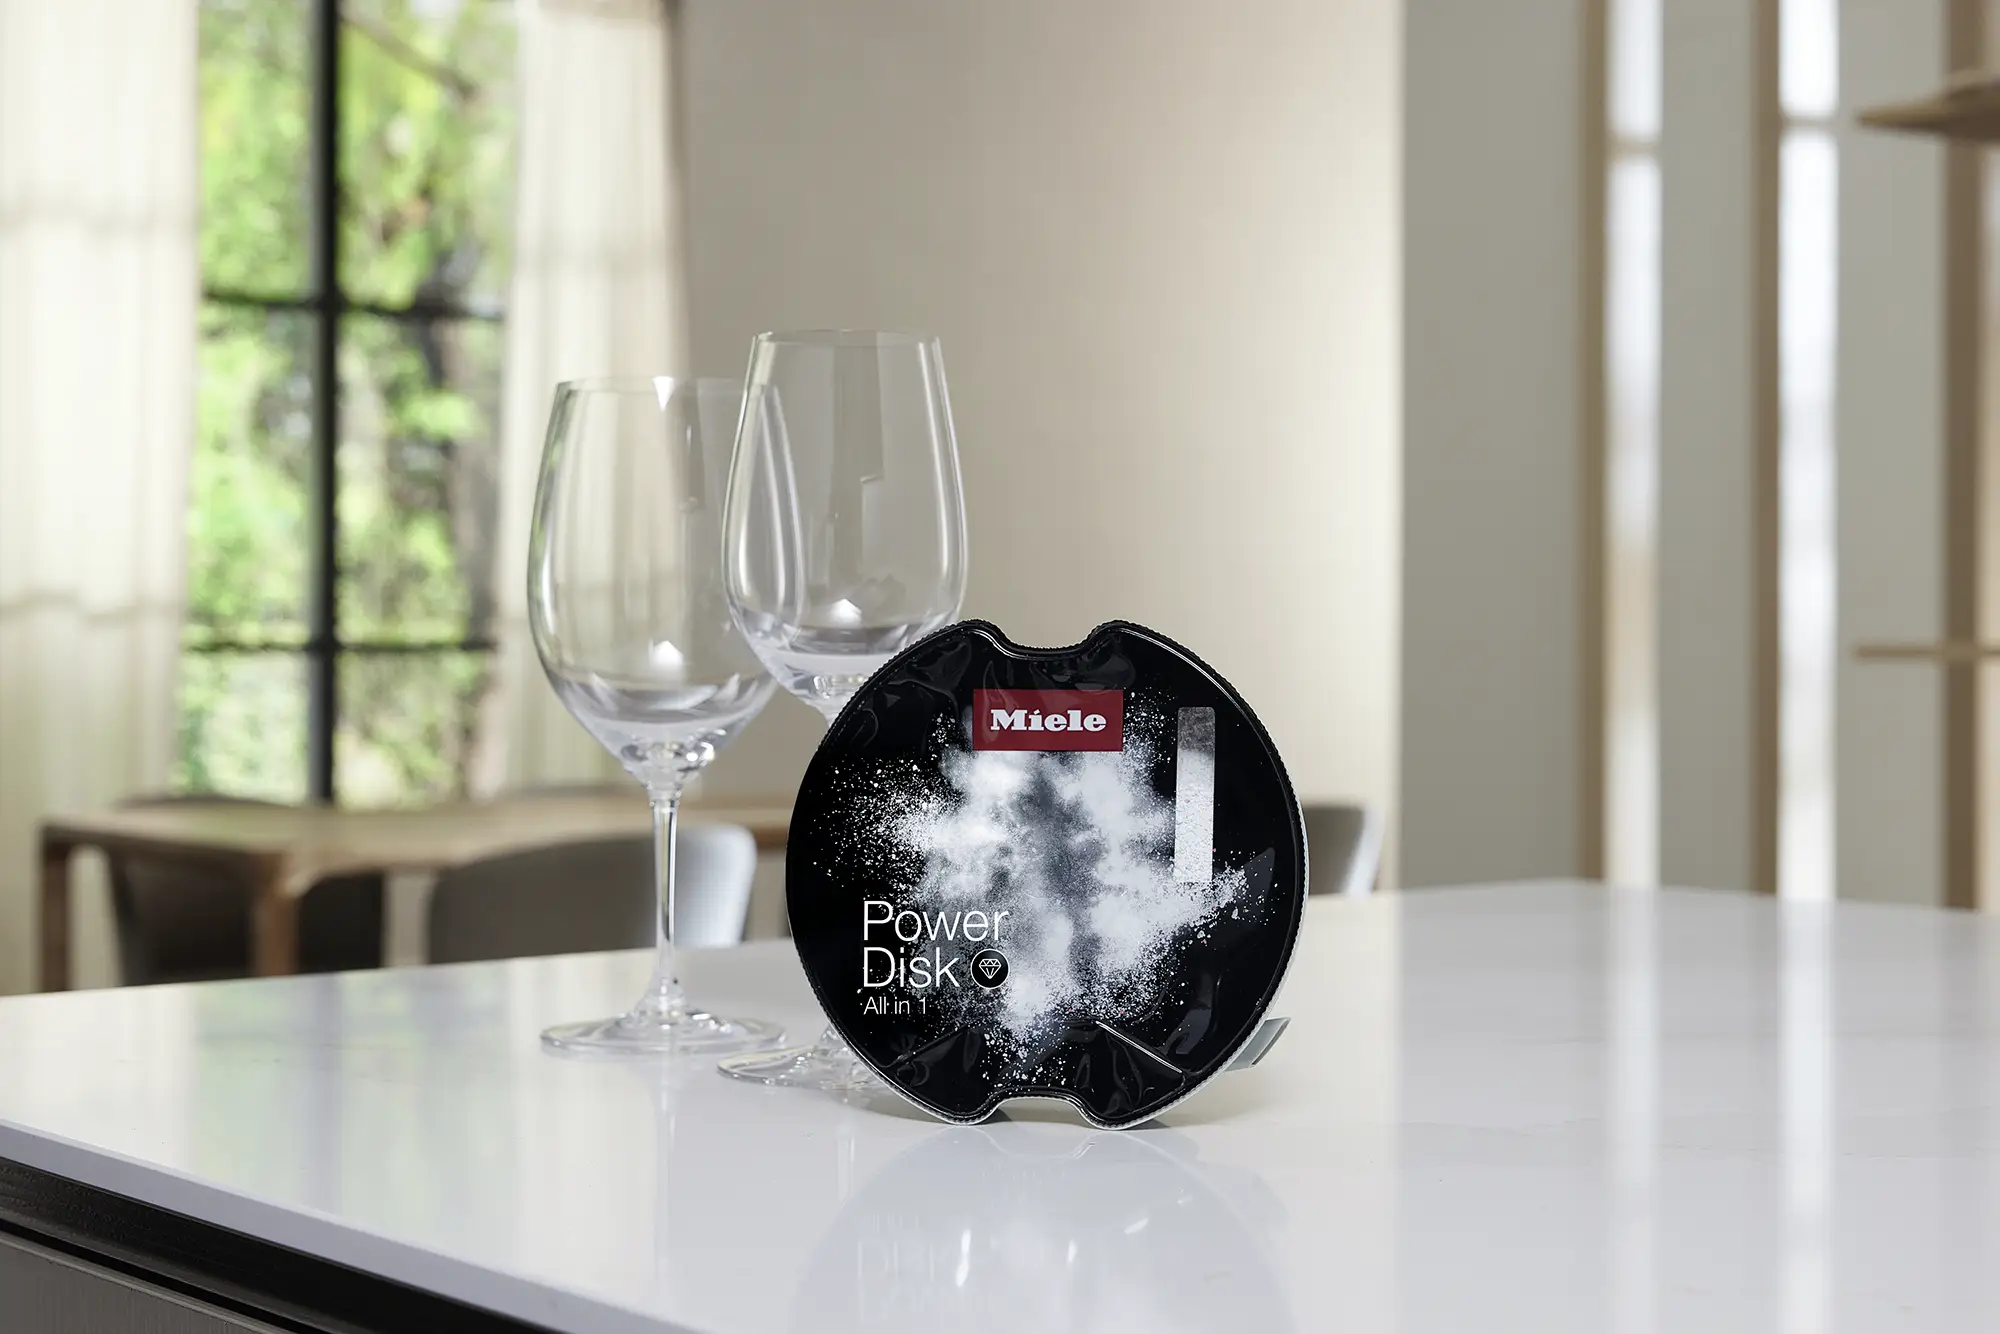 PowerDisk and wine glasses displayed on a counter